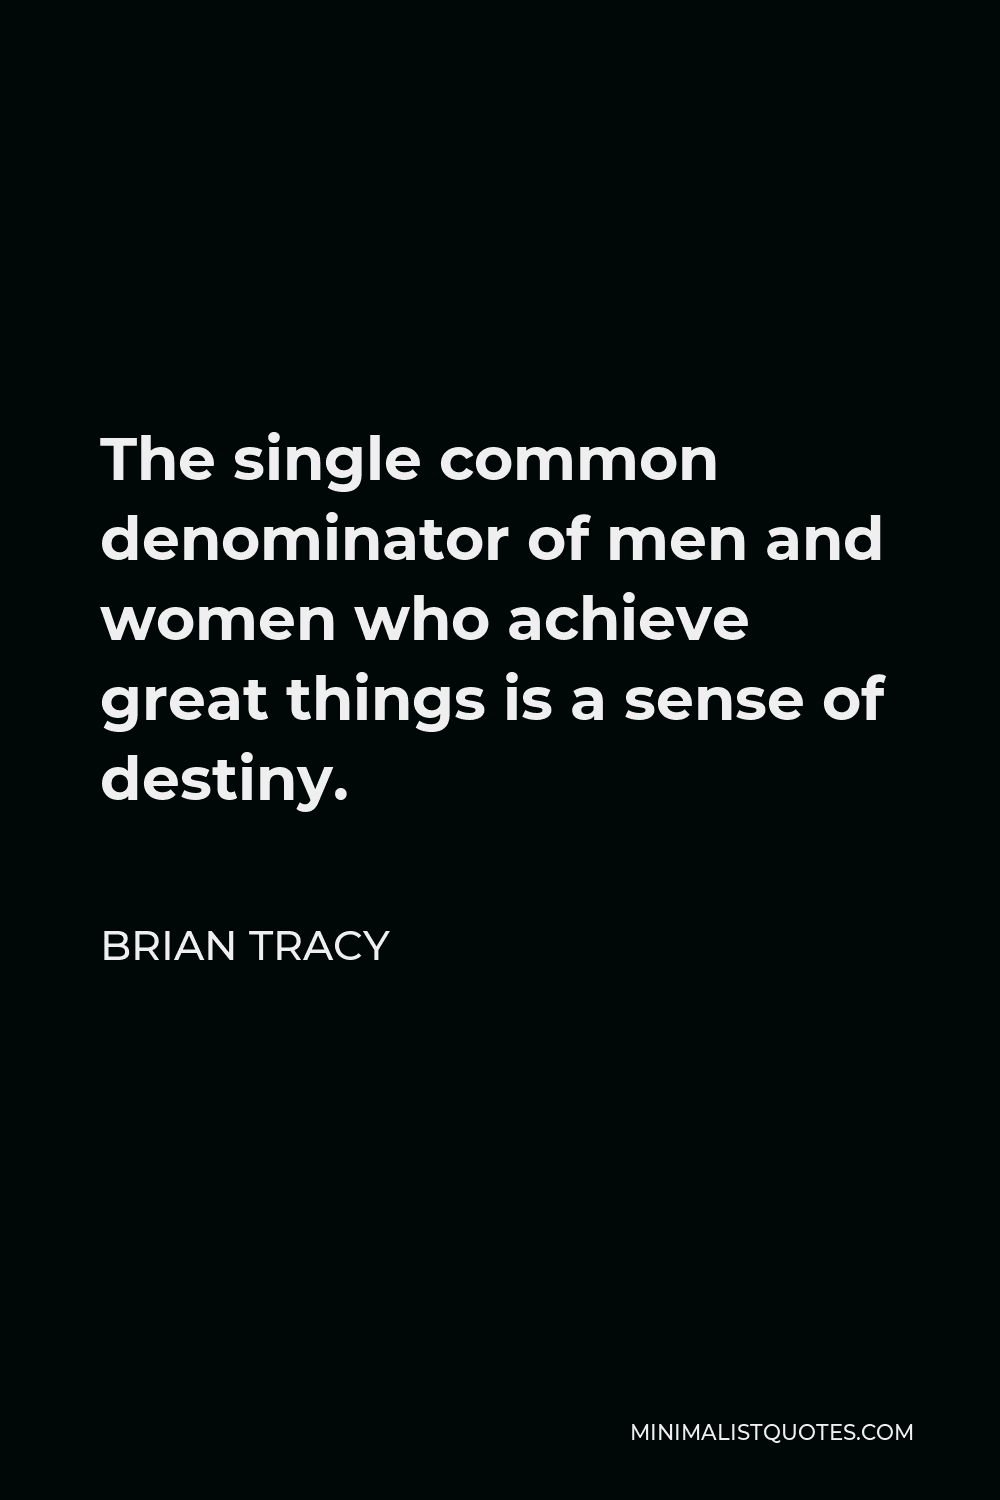 Brian Tracy Quote - The single common denominator of men and women who achieve great things is a sense of destiny.